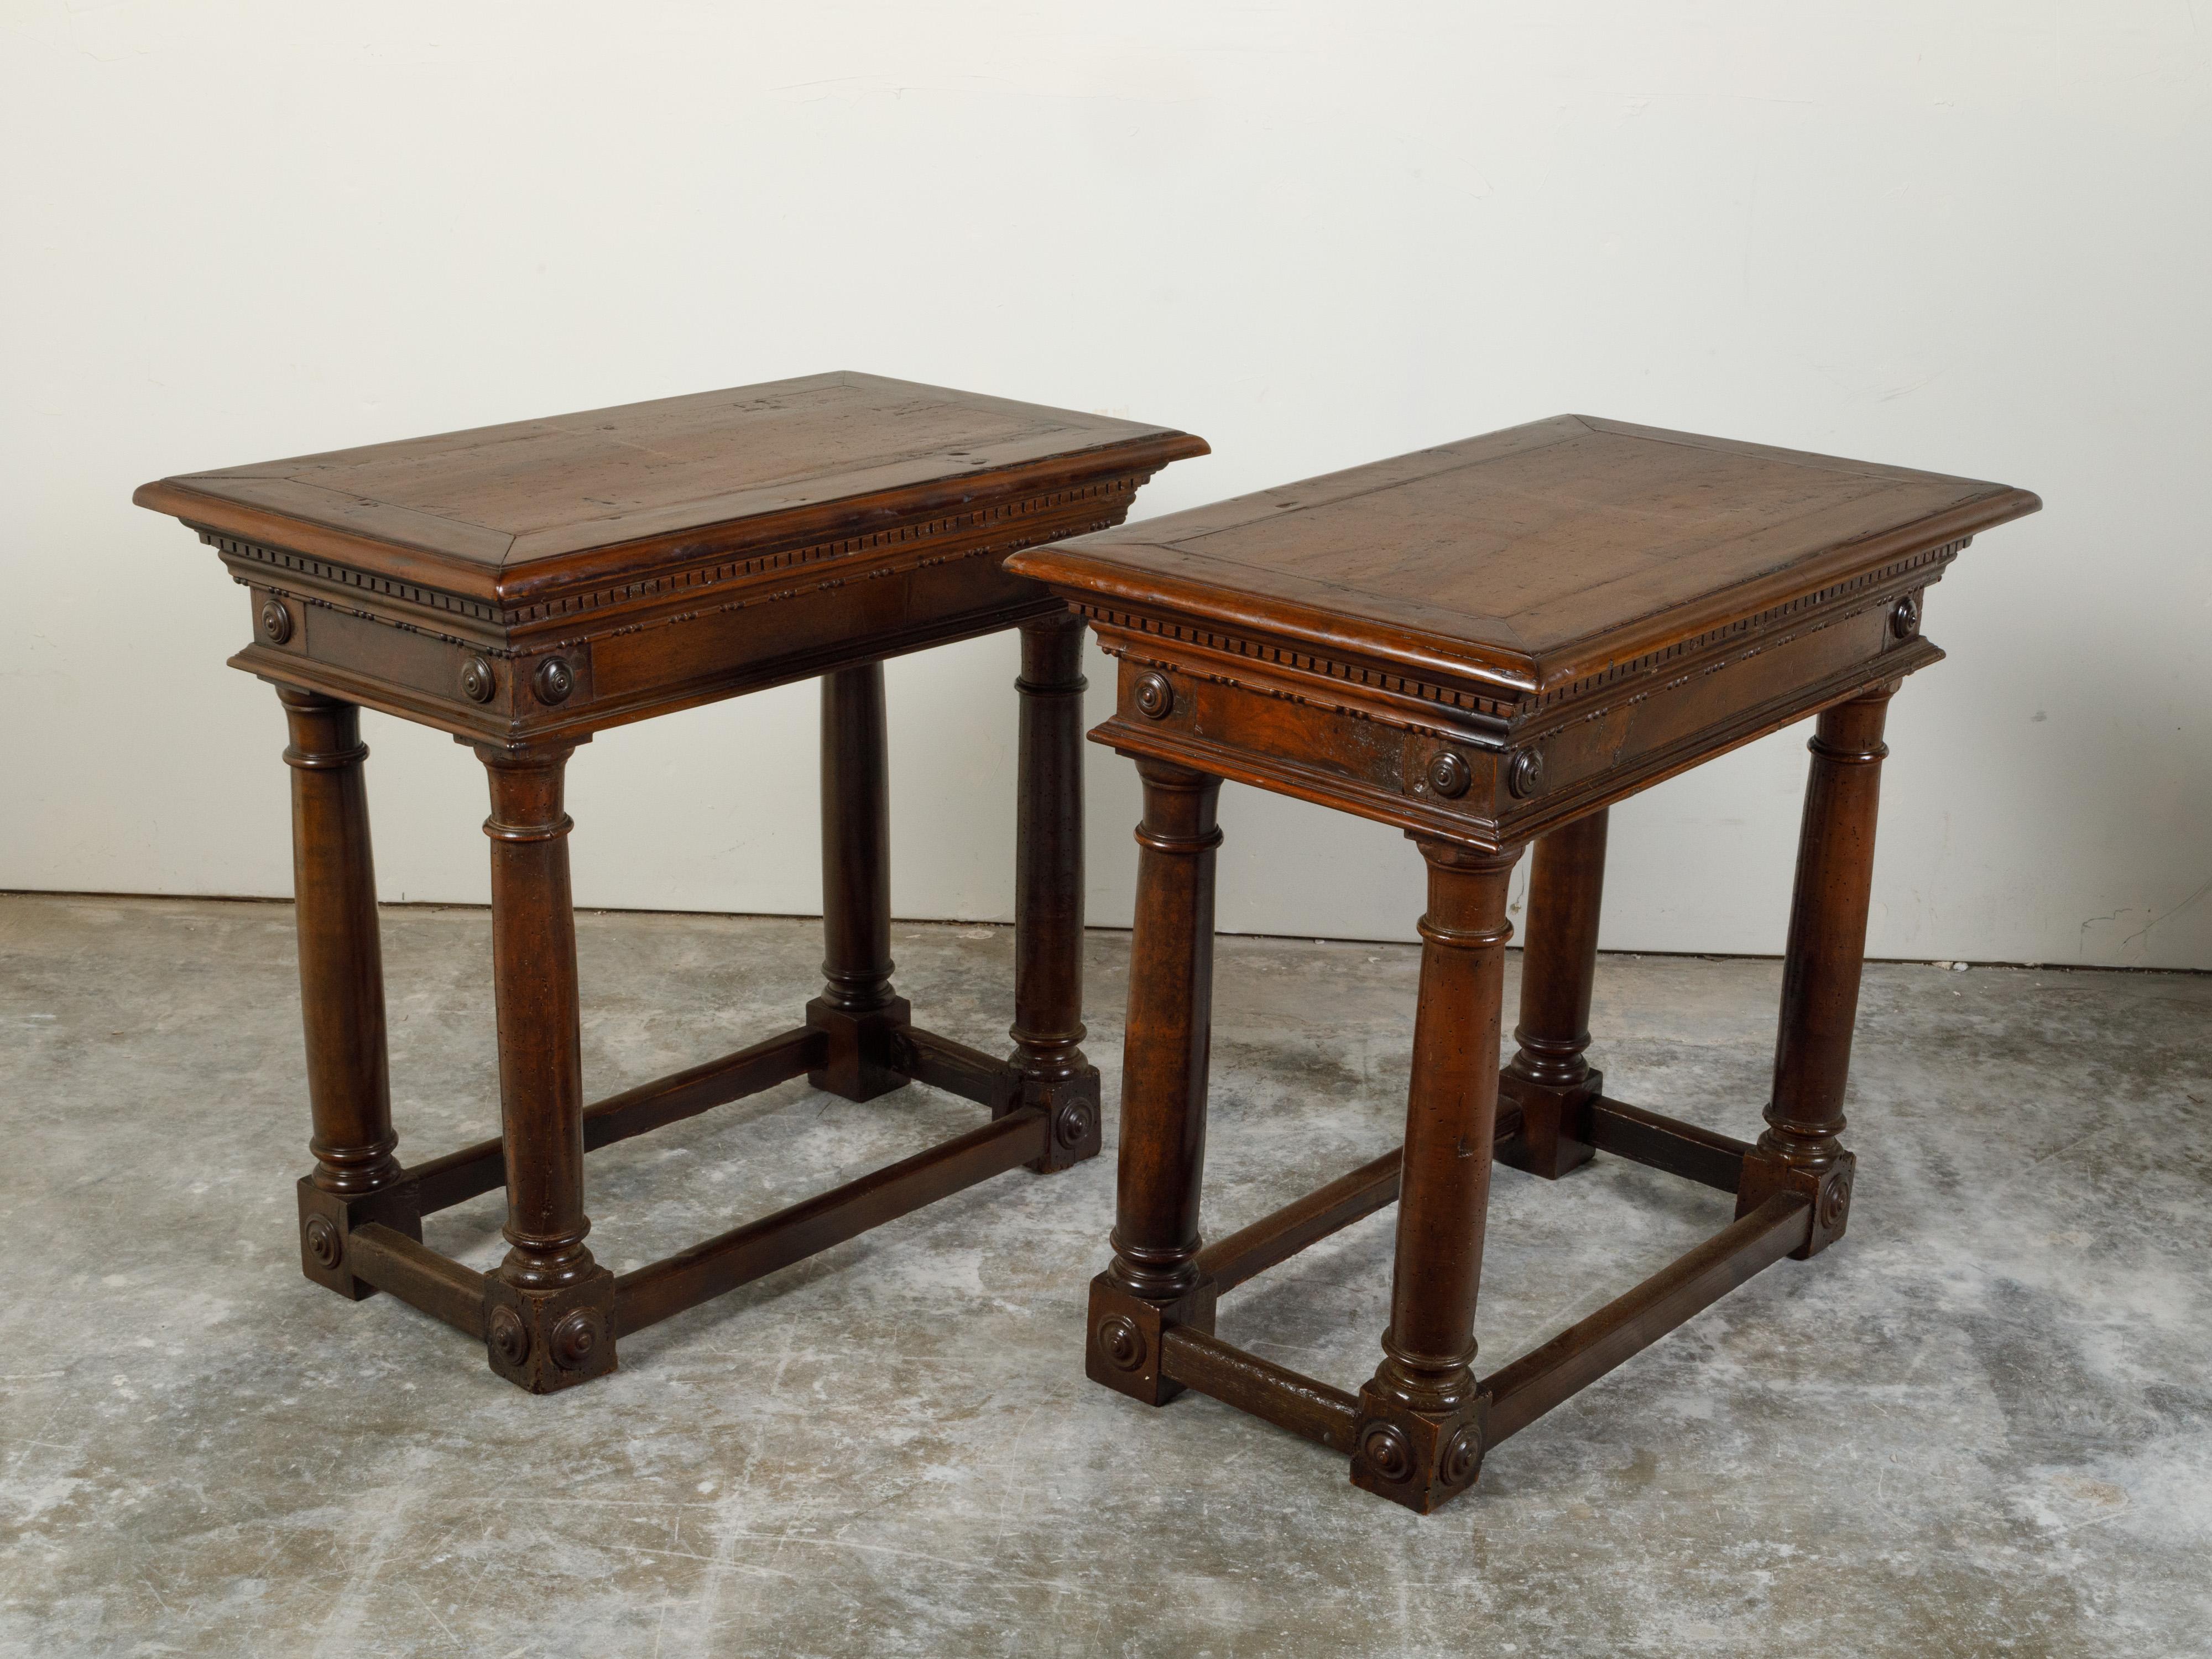 Pair of Italian 19th Century Carved Walnut Console Tables with Doric Columns For Sale 4